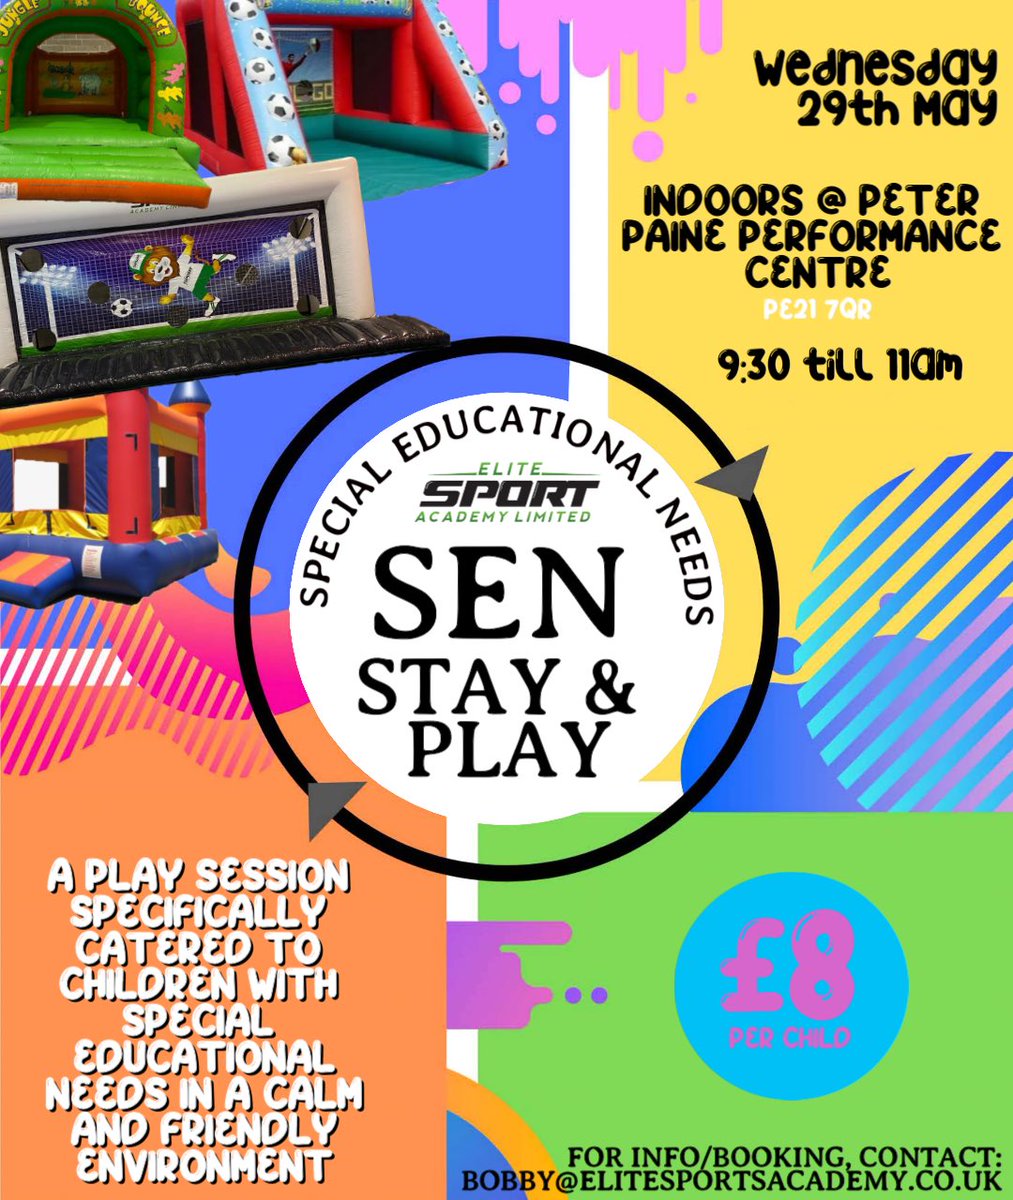 🌟SEN Stay and Play🌟 Back by Popular Demand This May Half Term 💚 📍 Wednesday 29th May - Peter Paine, Boston ⏱️ 9.30am - 11.am We are excited to host such an amazing event 💚 Bouncy castles, Inflatable Fun & more 😀 📧 Bobby@elitesportsacademy.co.uk